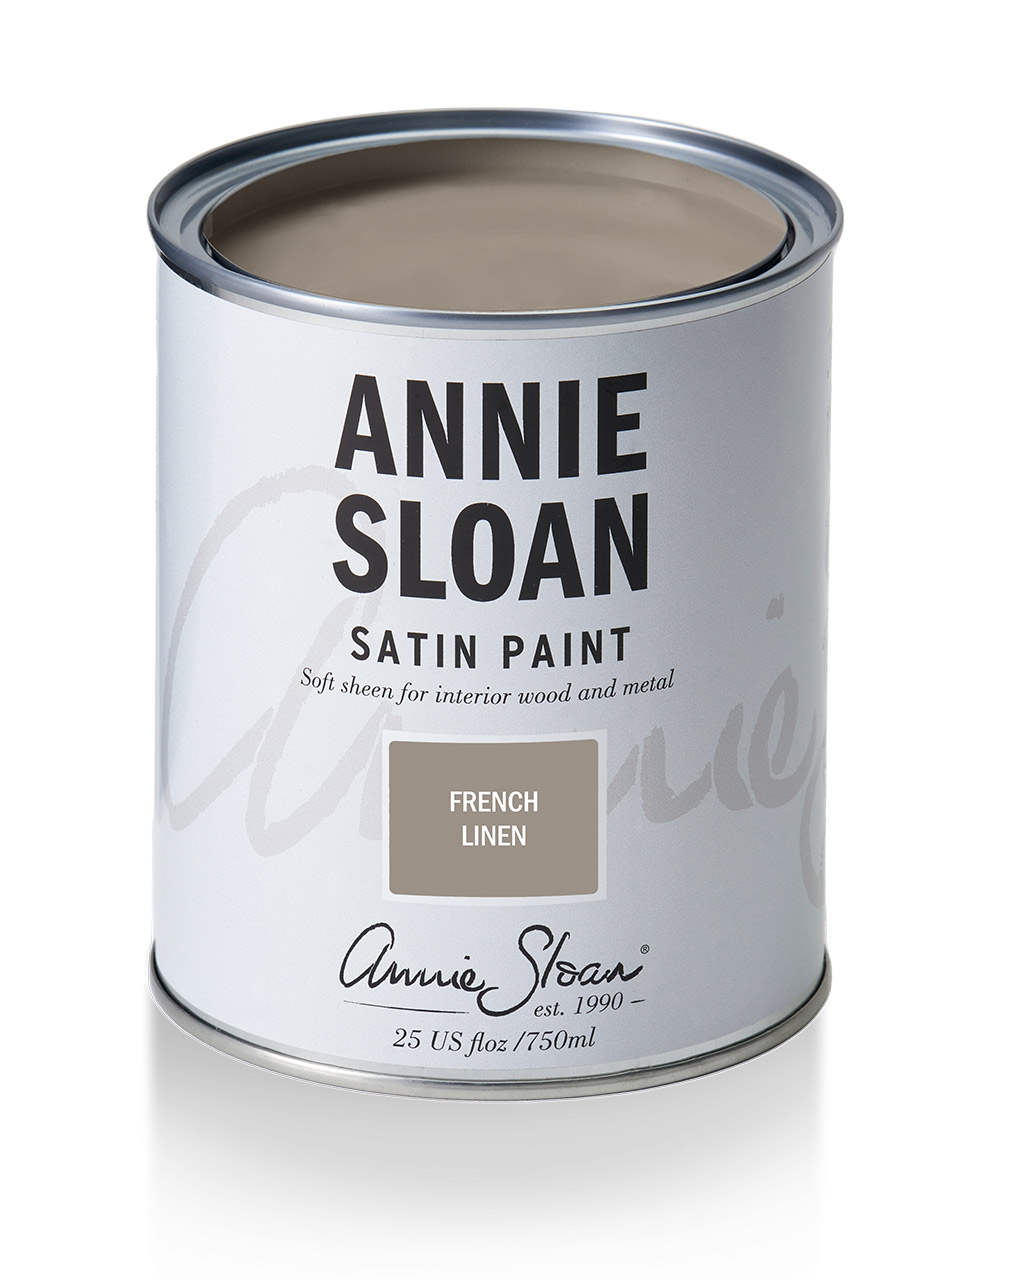 Product shot of Annie Sloan Satin Paint tin in French Linen